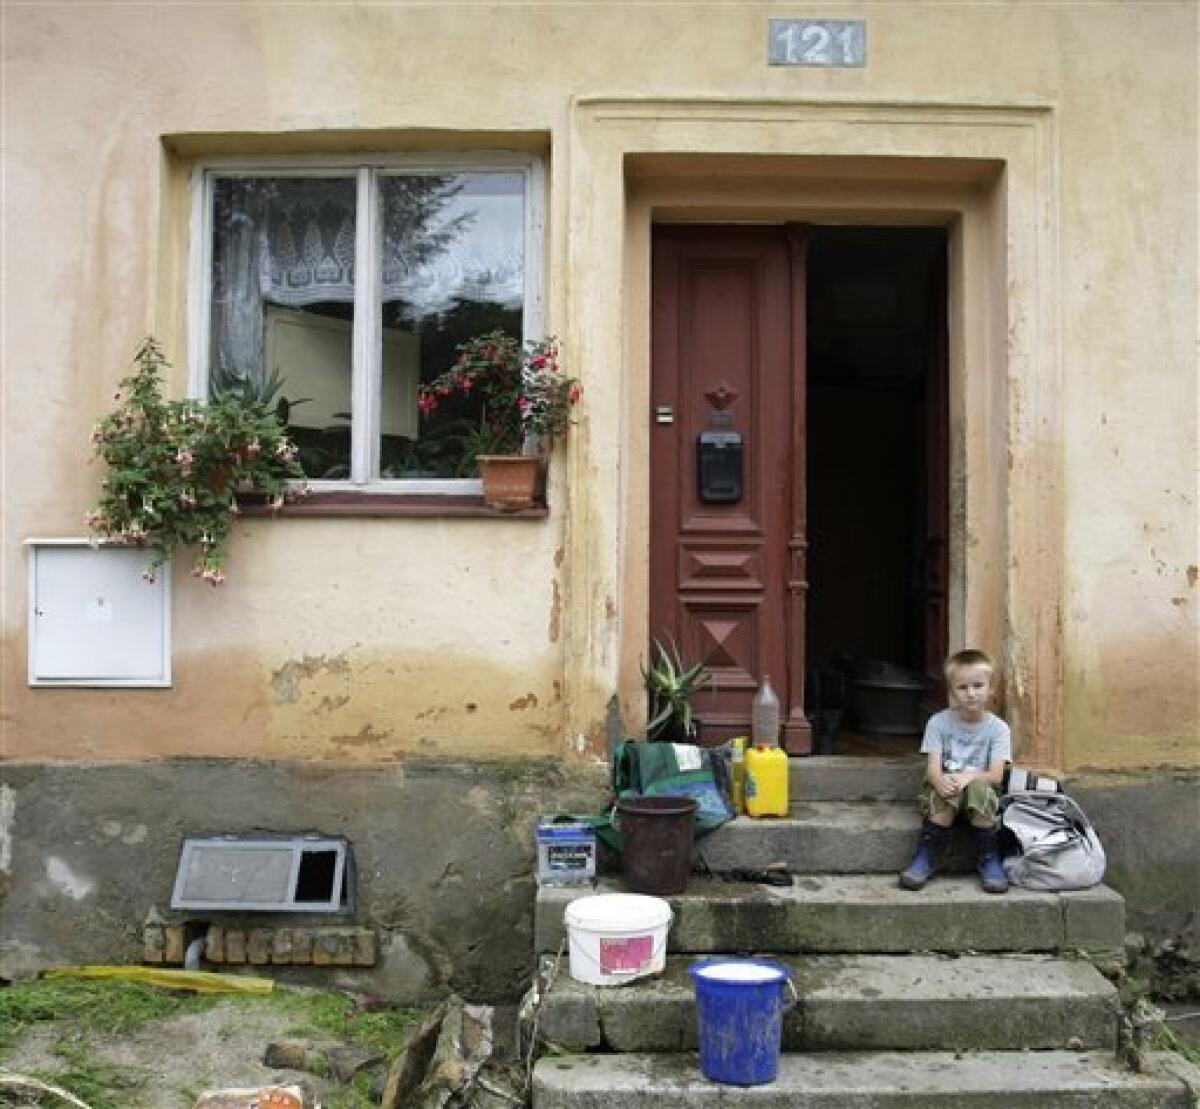 A young boy sits in front of a house damaged in flash floods in the village of Hermanice, Czech Republic, Sunday, Aug. 8, 2010. The flooding has struck an area near the borders of Poland, Germany and the Czech Republic. (AP Photo/Petr David Josek)